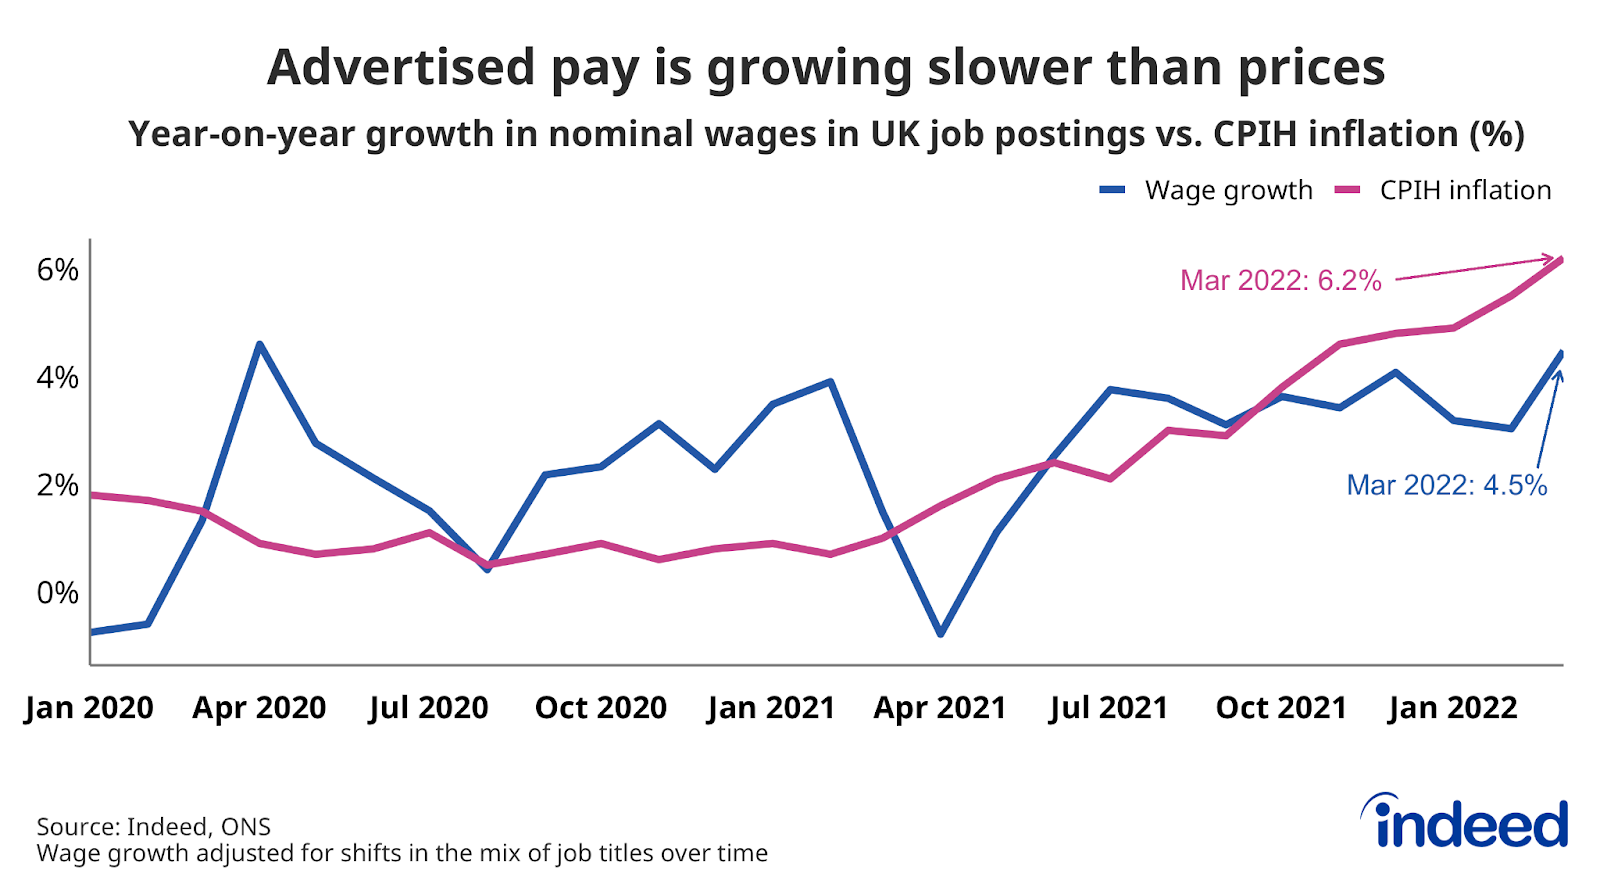 A line chart titled “Advertised pay is growing slower than prices” 